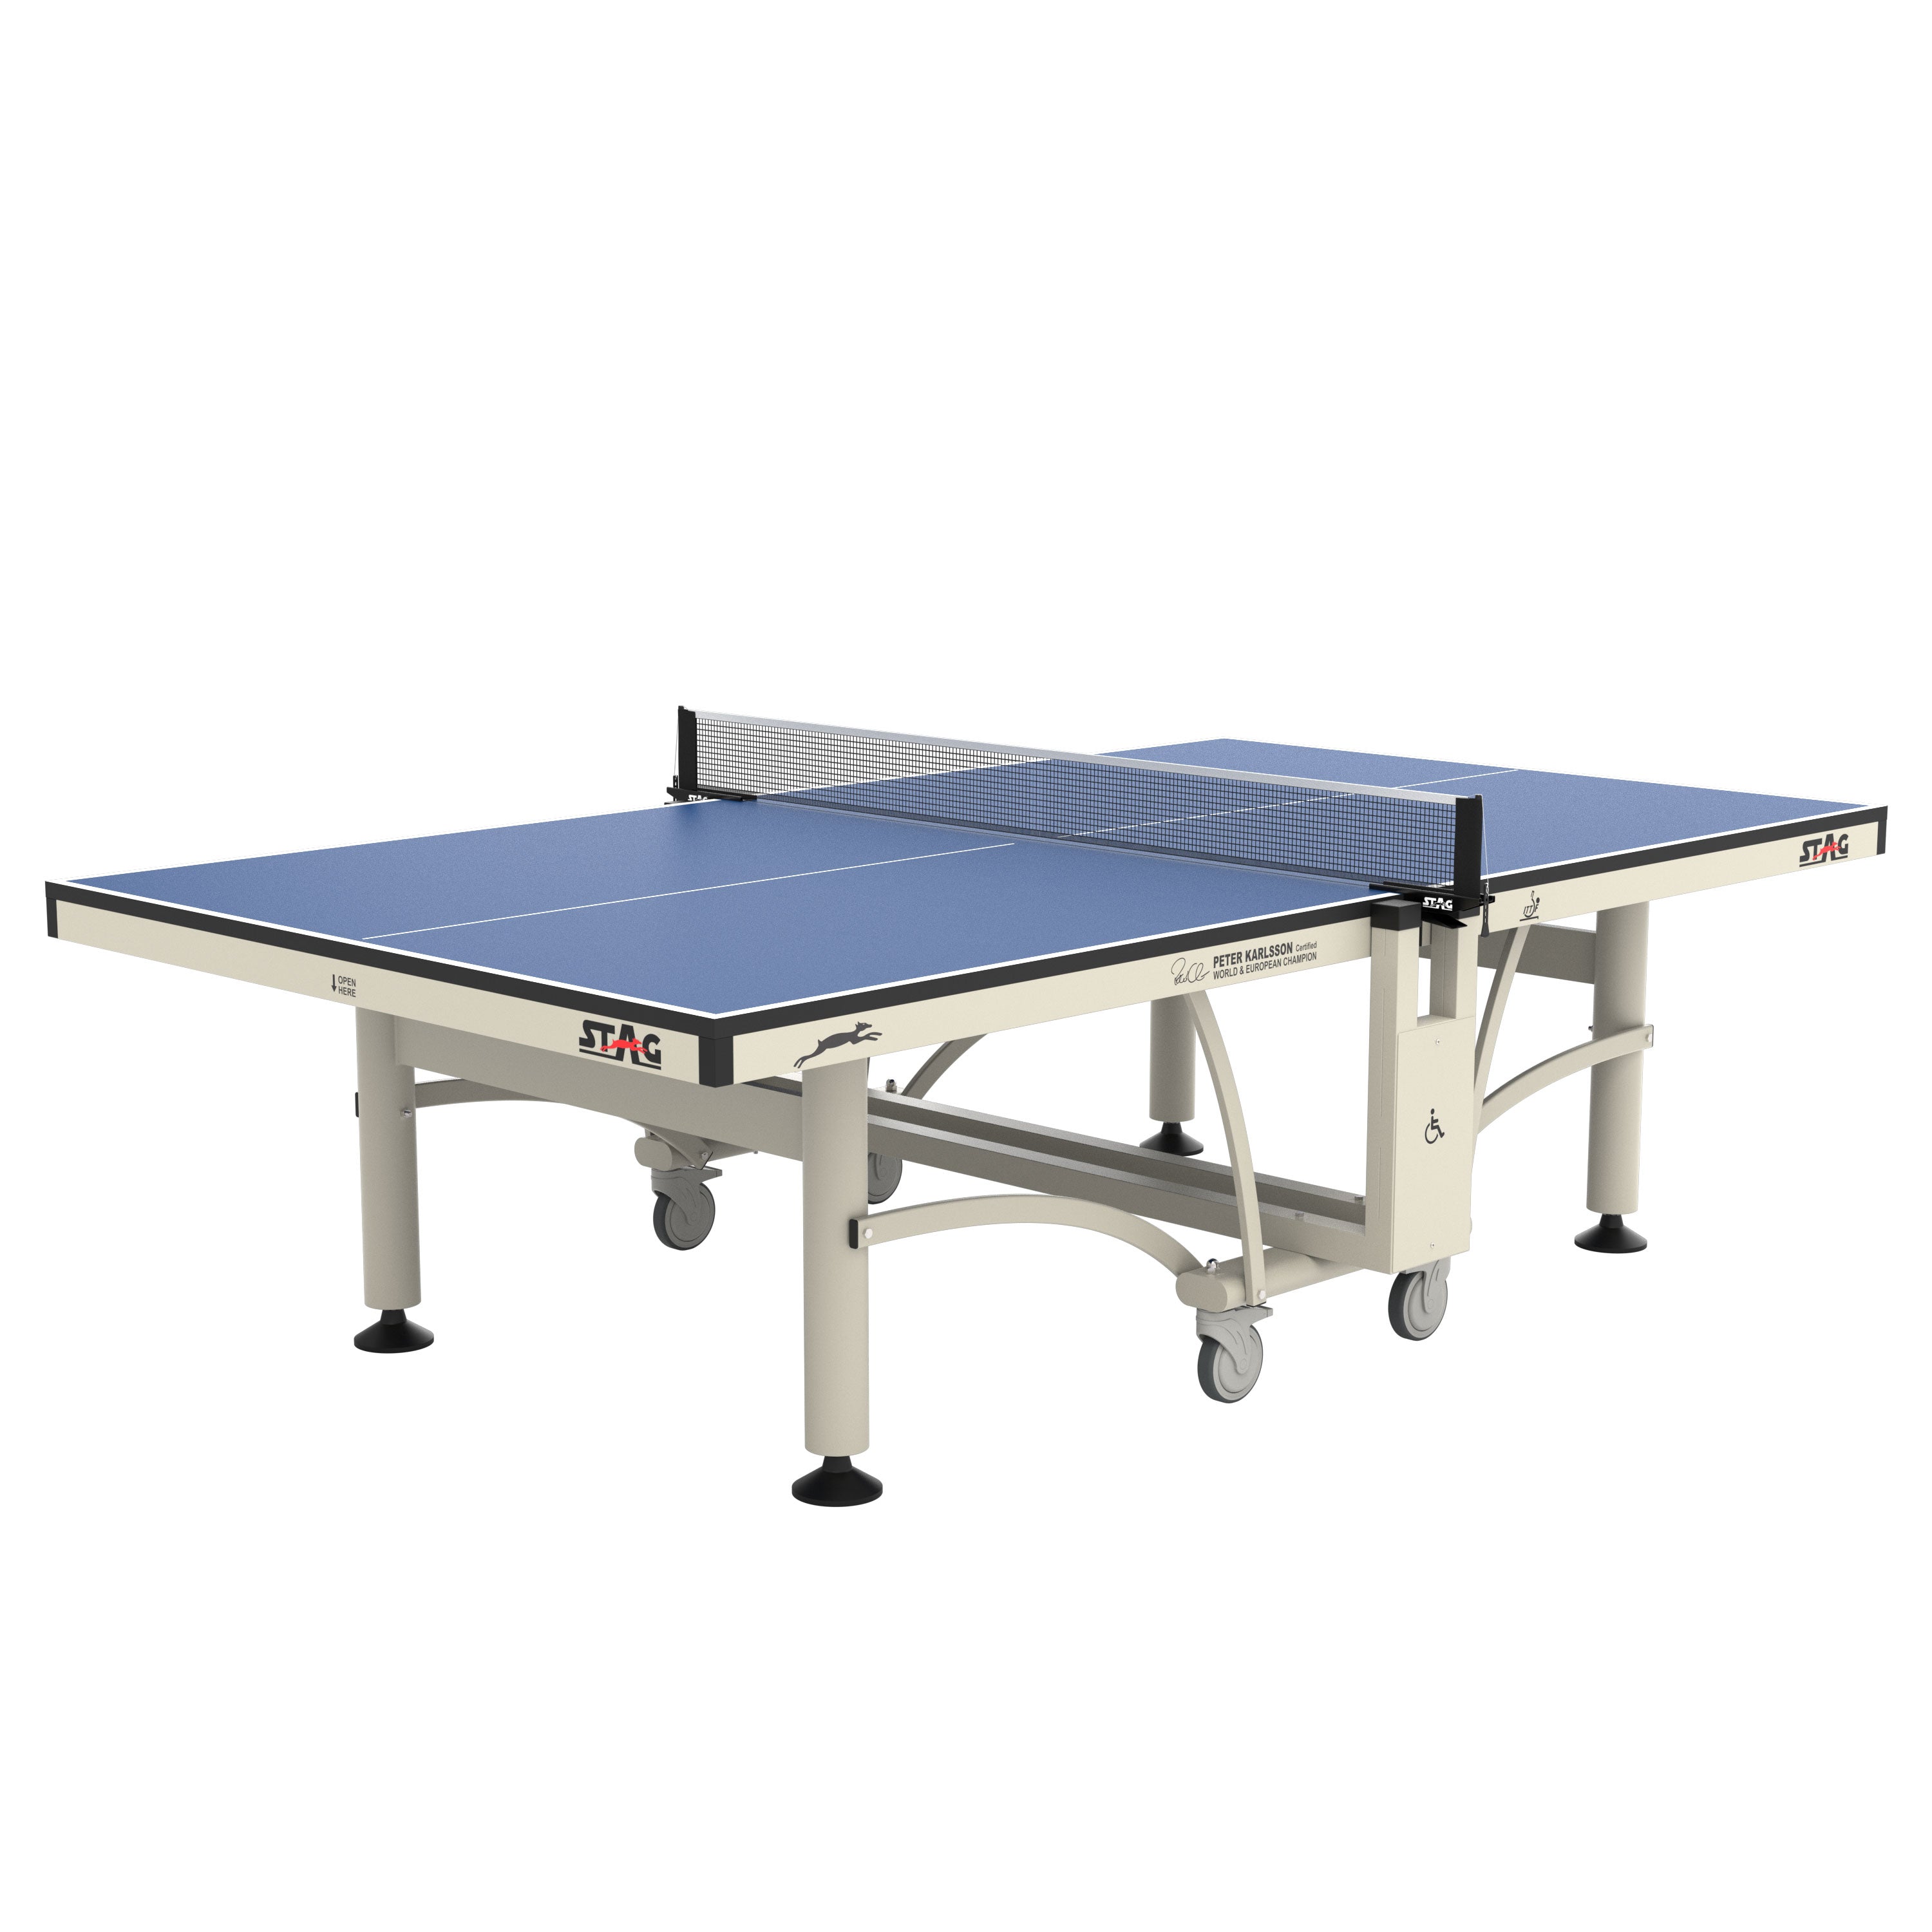 Peter Karlsson Competition Table Tennis Table